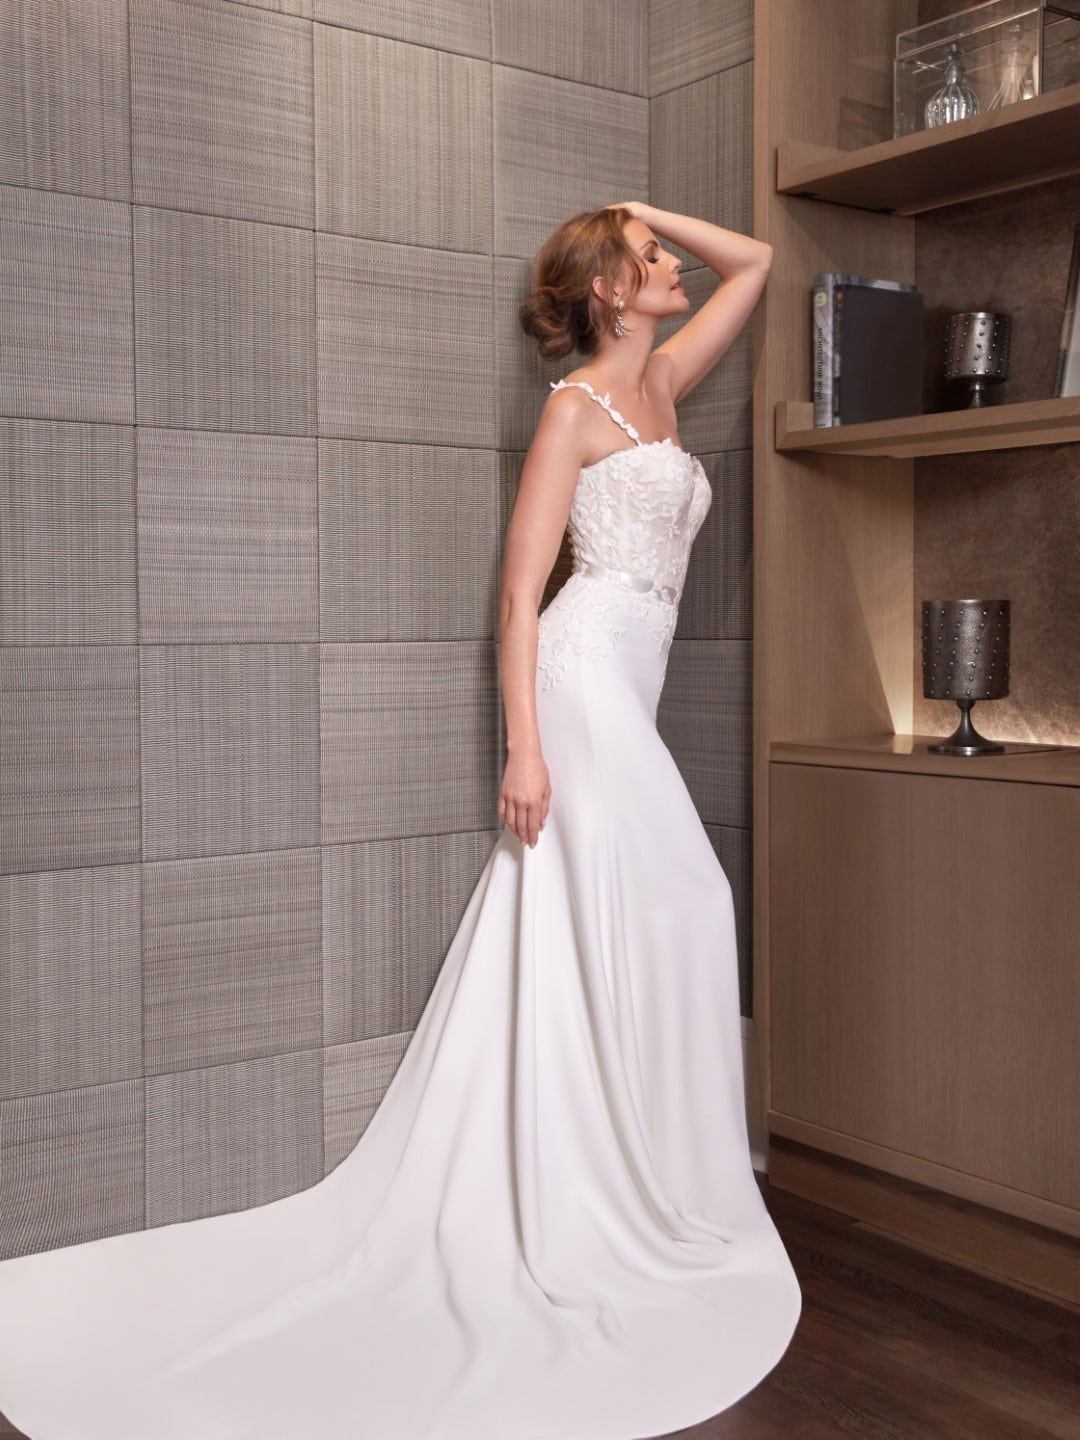 Seductive and sensuous, the Caroline Castigliano Sonata wedding dress features a structured bustier bodice and a figure-skimming Italian crepe fit-and-flare skirt. Find your perfect wedding dress at Your Dream Bridal near Boston.